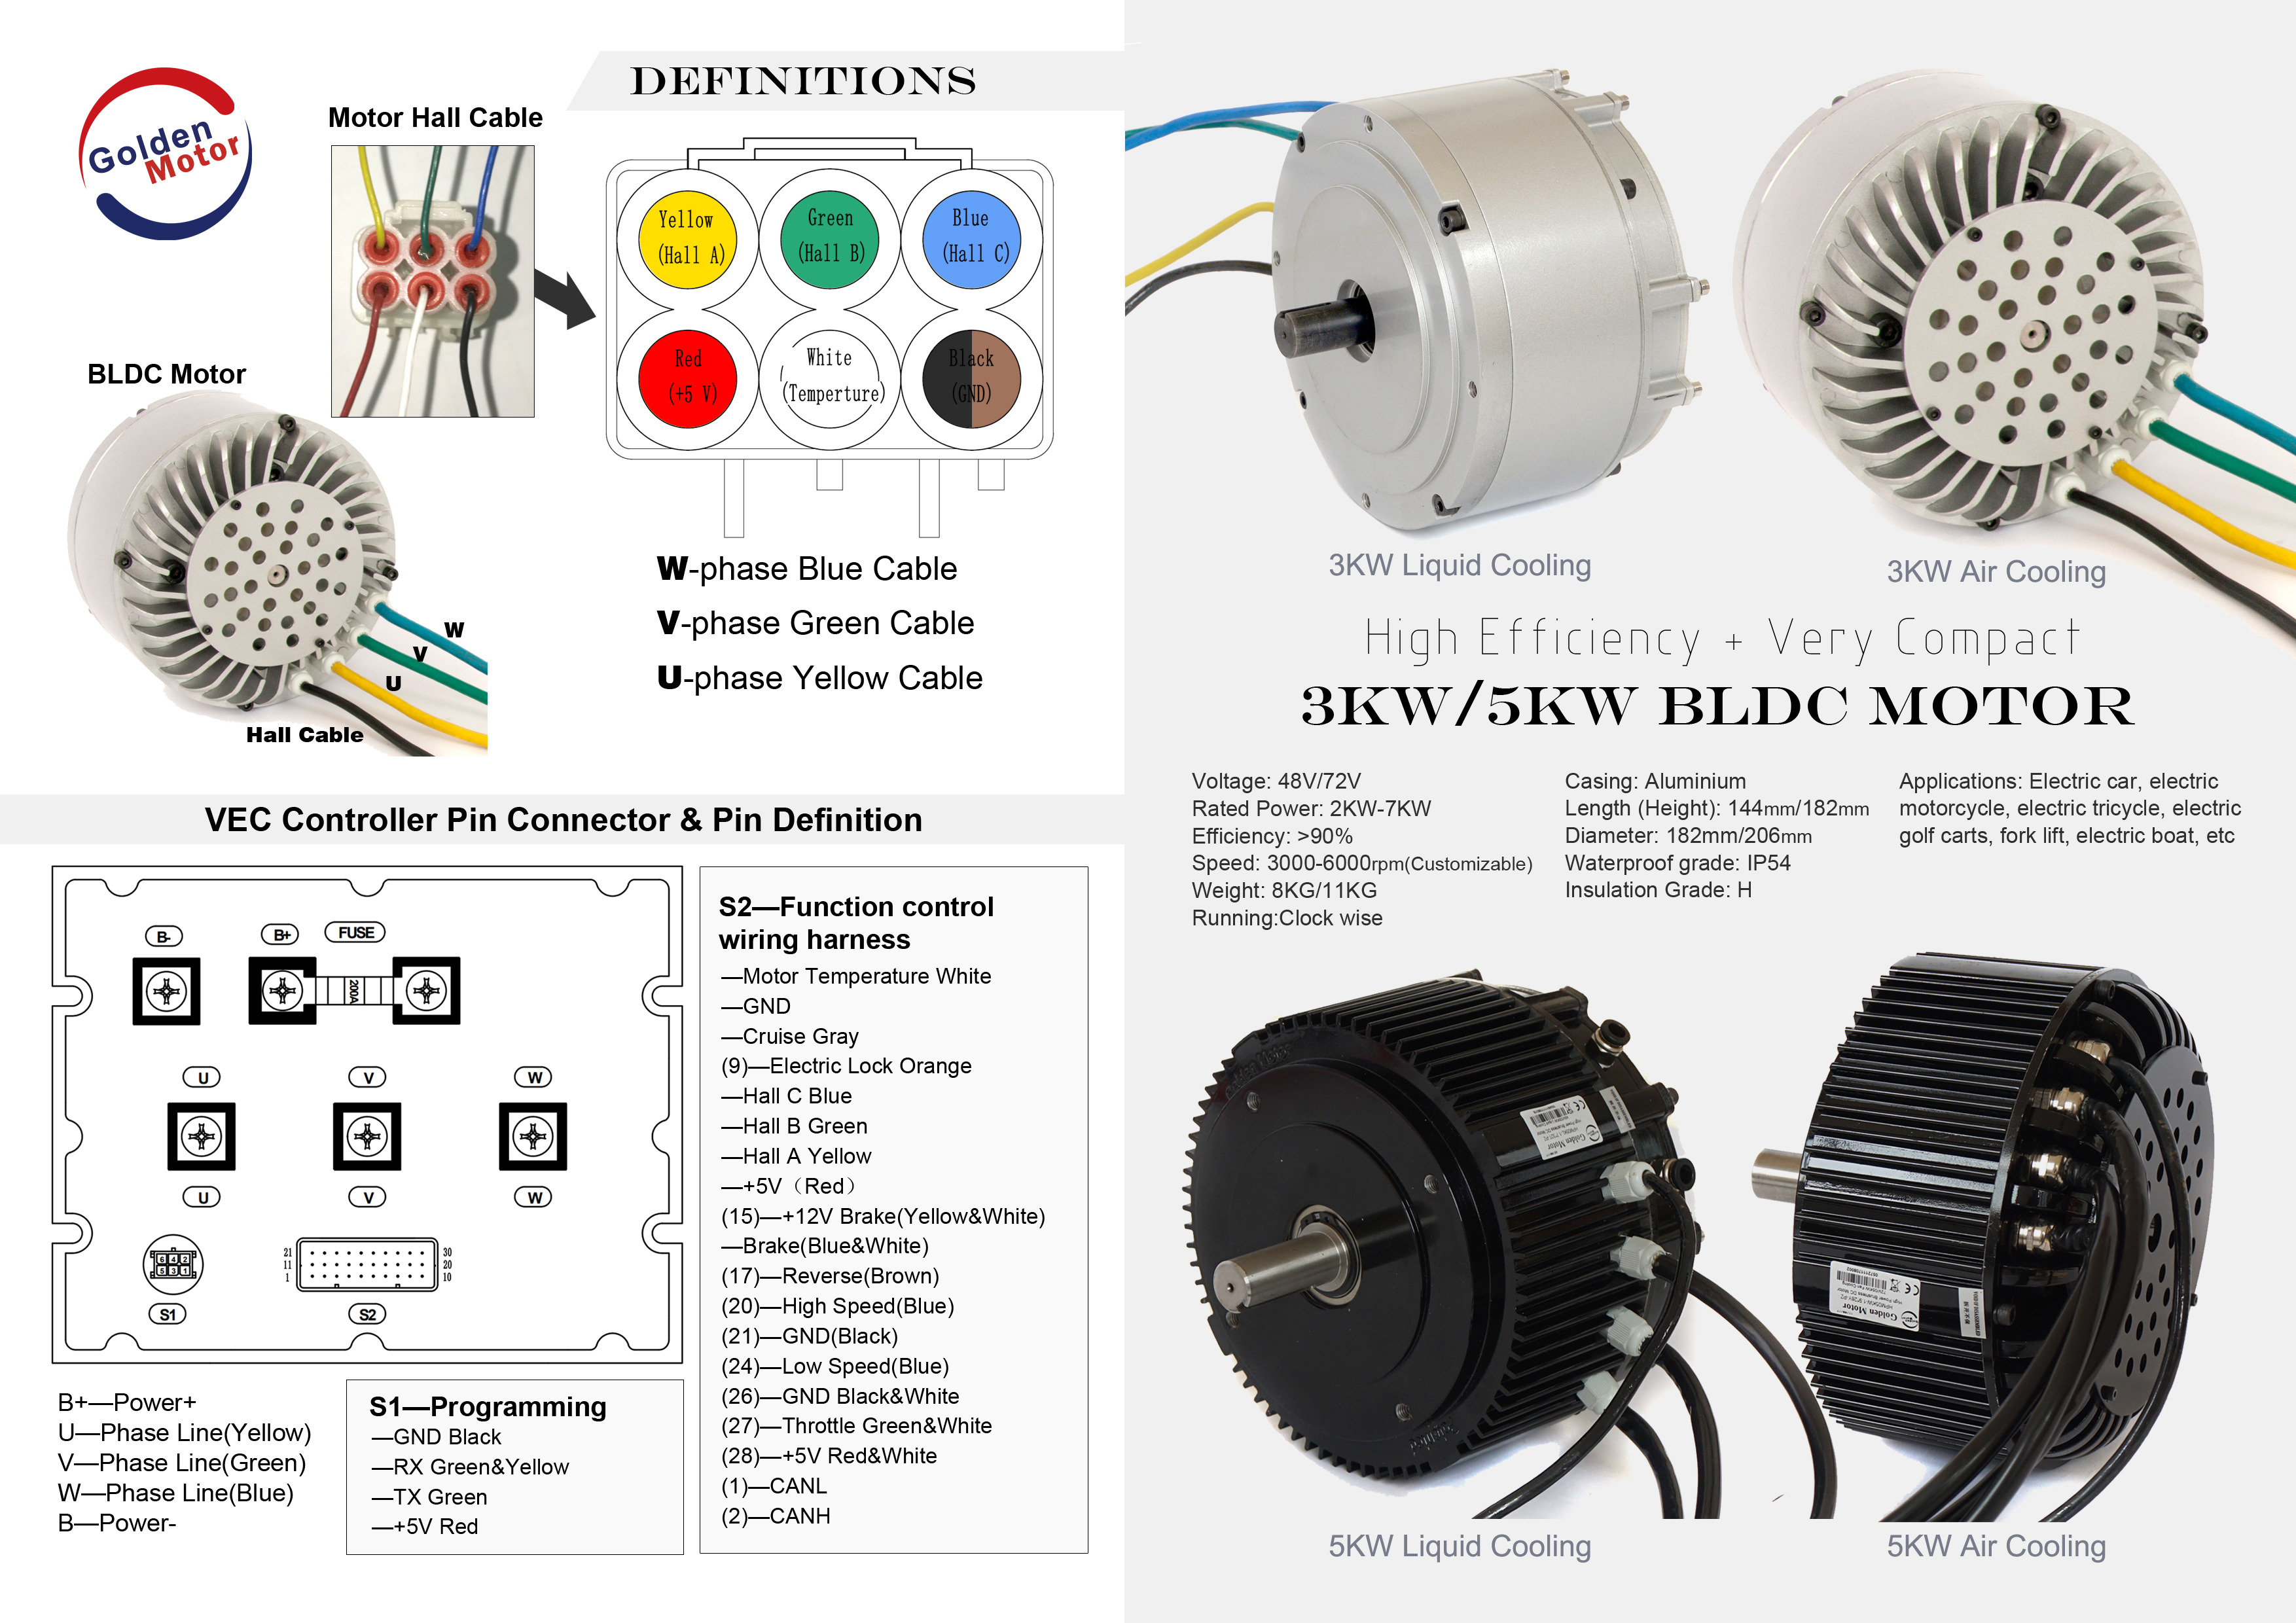 5 KW BLDC Motor Air Cooled - Golden Motor North America - Canada and USA